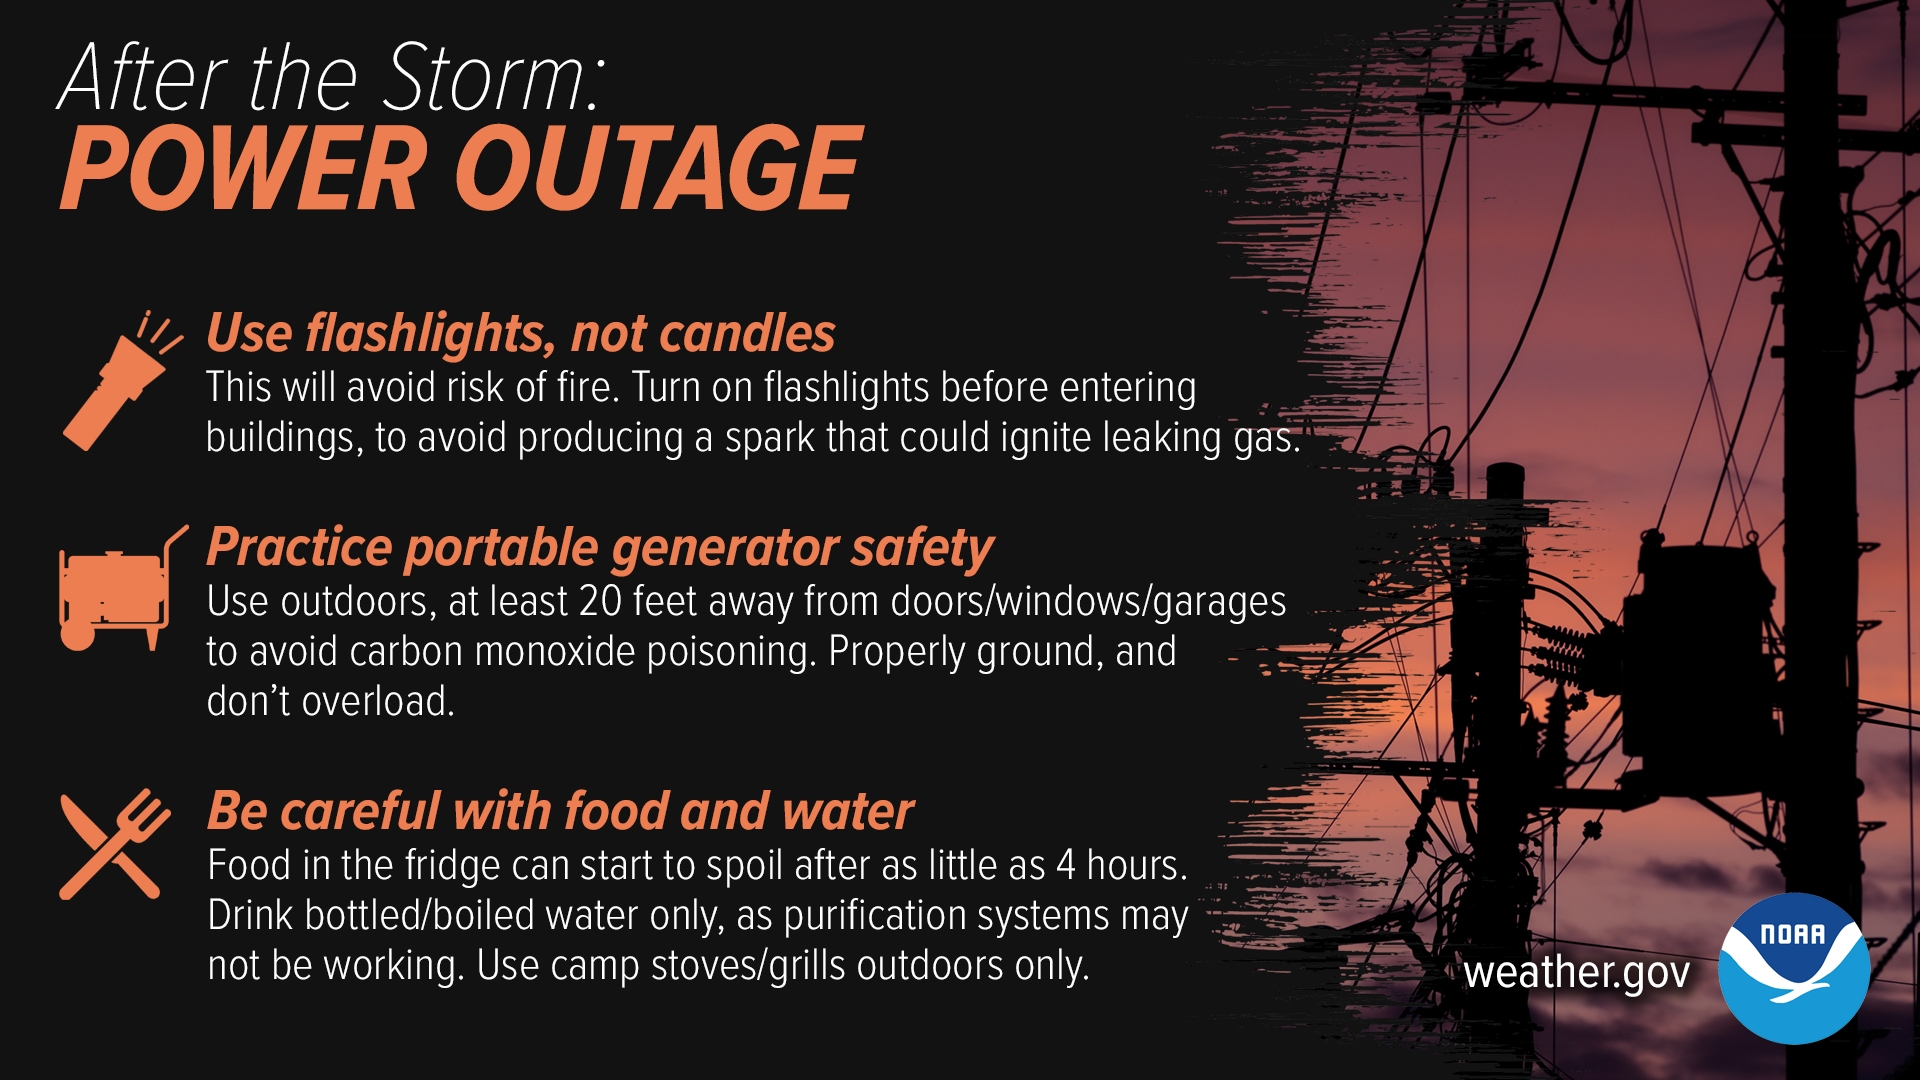 After The Storm: Power Outage. 1) Use flashlights, not candles. This will avoid risk of fire. Turn on flashlights before entering buildings to avoid producing a spark that could ignite leaking gas. 2) Practice portable generator safety. Use outdoors, at least 20 feet away from doors/windows/garages to avoid carbon monoxide poisoning. Properly ground, and don't overload. 3) Be careful with food and water. Food in the fridge can start to spoil after as little as 4 hours. Drink bottled/boiled water only, as purification systems may not be working. Use camp stoves/grills outdoors only.